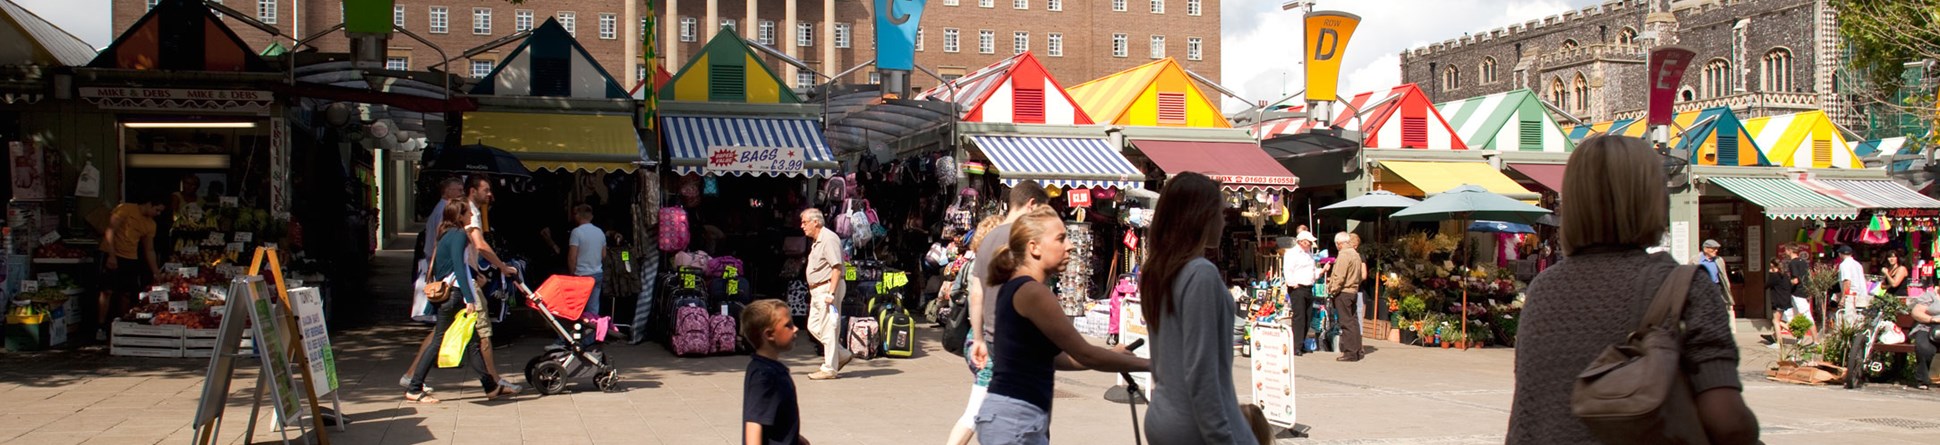 People around market stalls with a large civic building in the background.